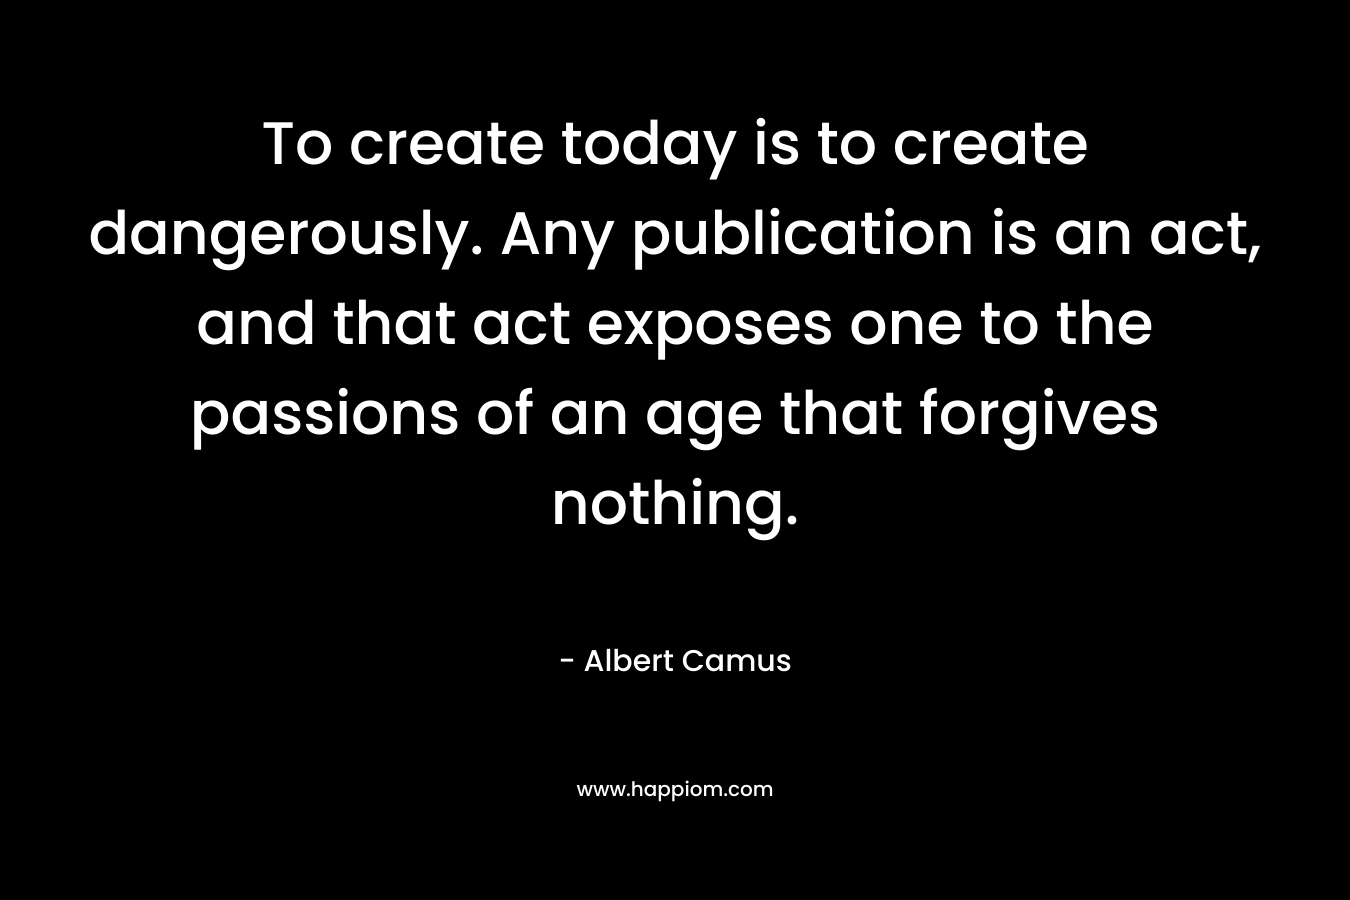 To create today is to create dangerously. Any publication is an act, and that act exposes one to the passions of an age that forgives nothing.